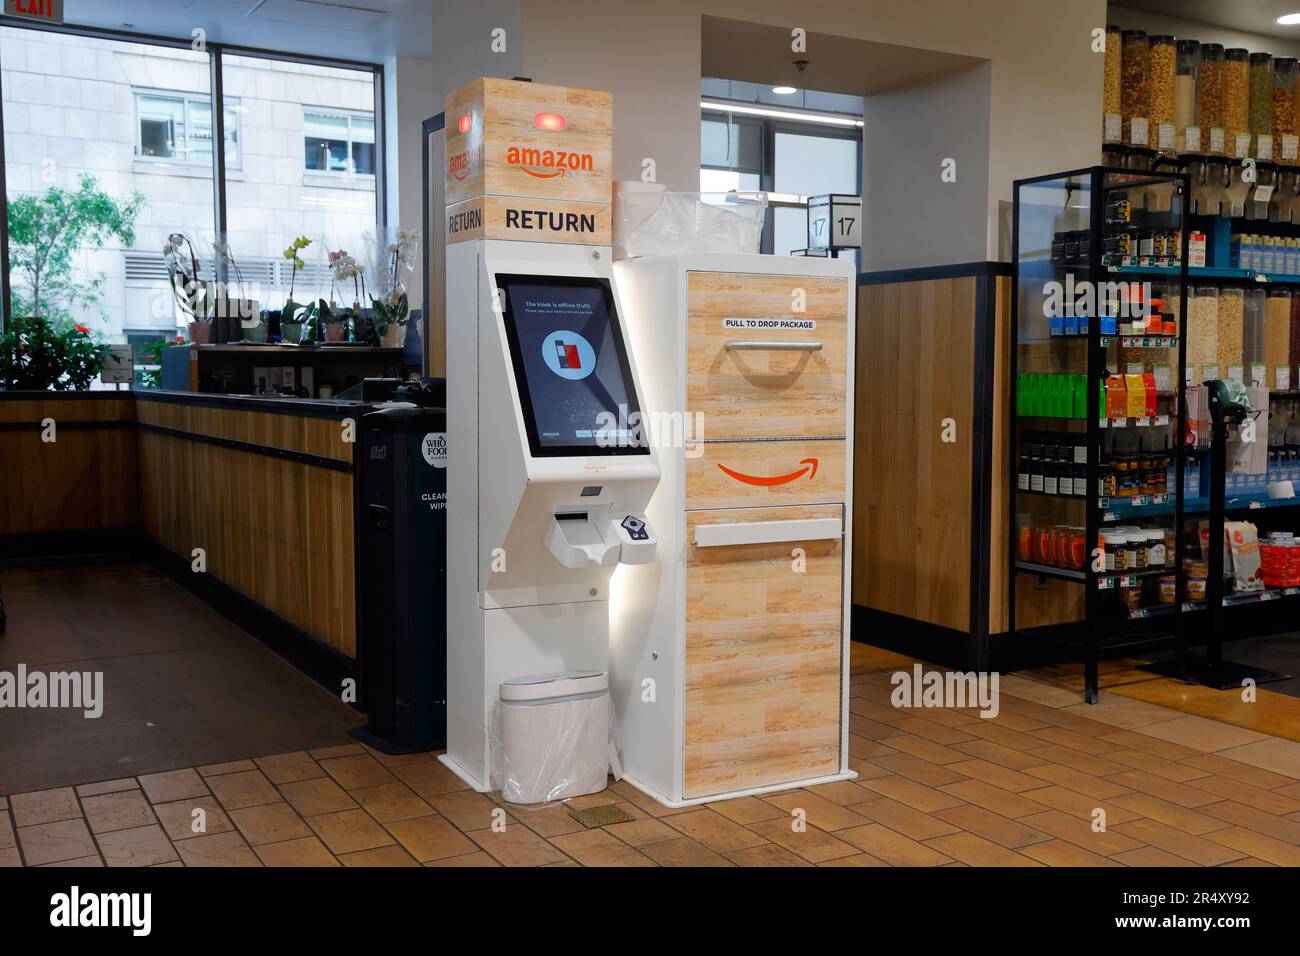 An automated Amazon Return kiosk at a Whole Foods Market for dropping off returns of items purchased from the online retailer. Stock Photo